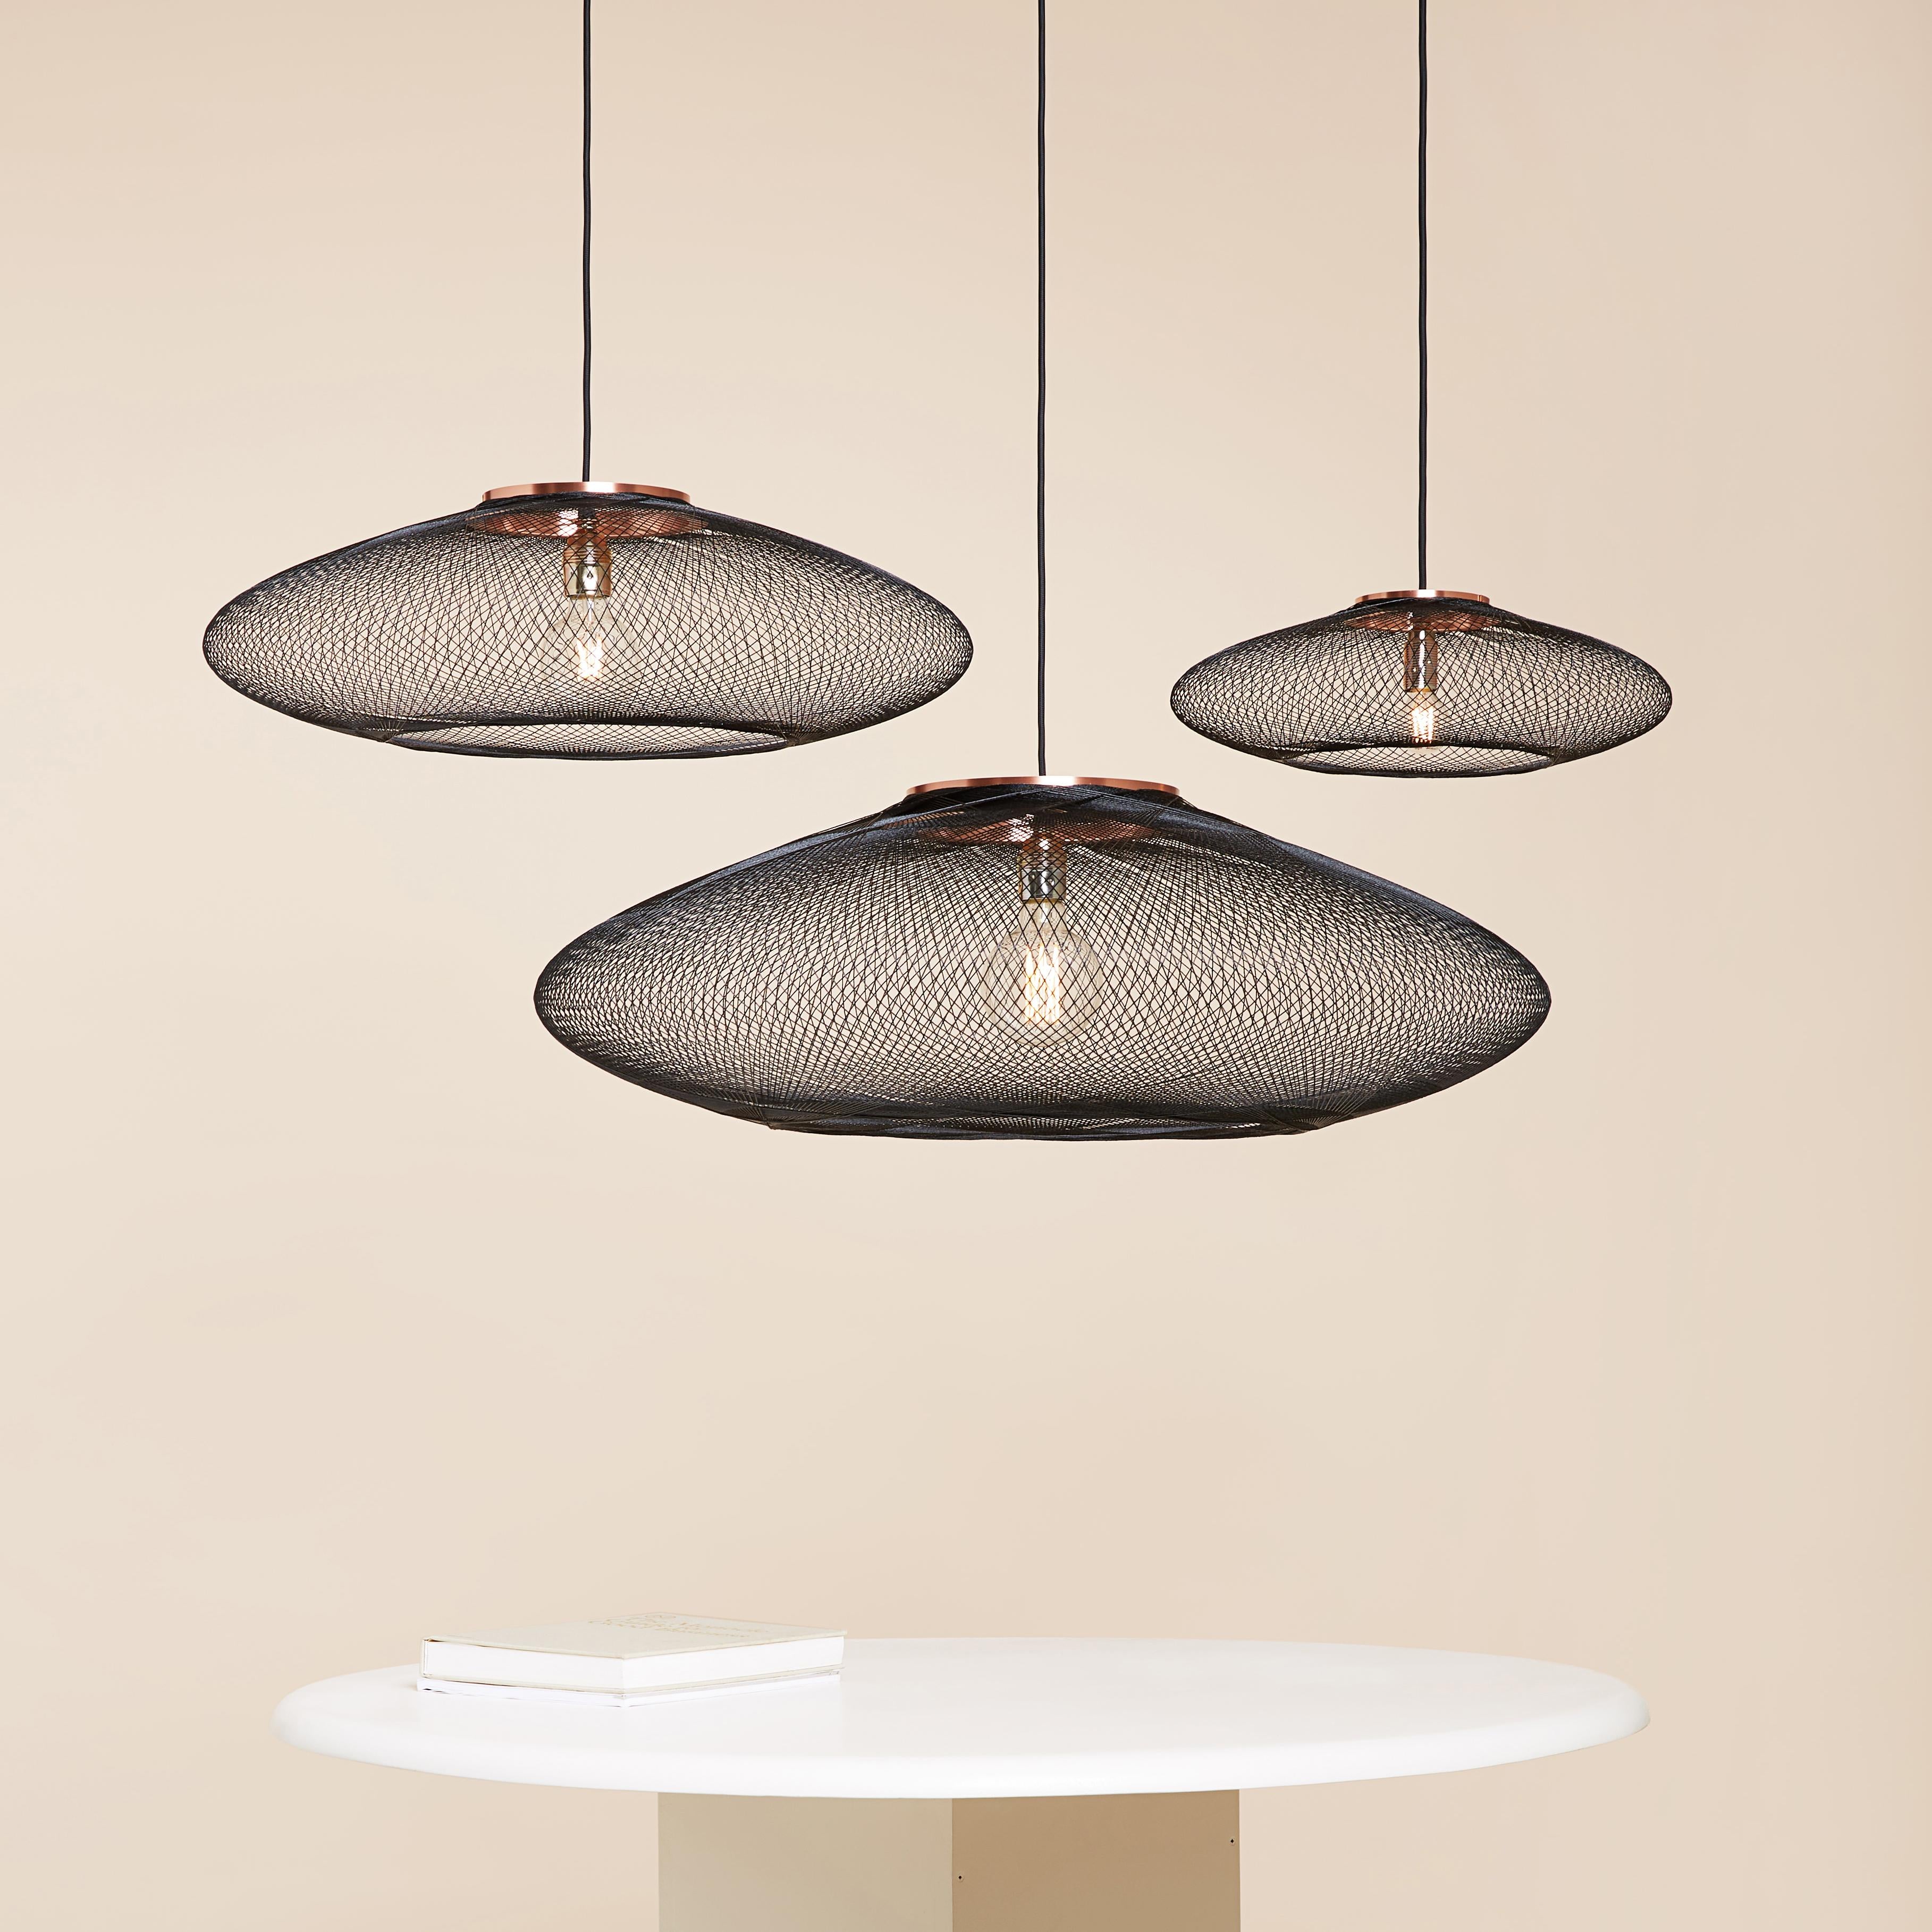 Small Black UFO pendant lamp by Atelier Robotiq
Dimensions: D 40 x H 12 cm
Materials: Resin-impregnated industrial fiber, copper.
Available with holder in copper/ brass/ black coated stainless steel.
Available in different colors, 3 sizes, and in